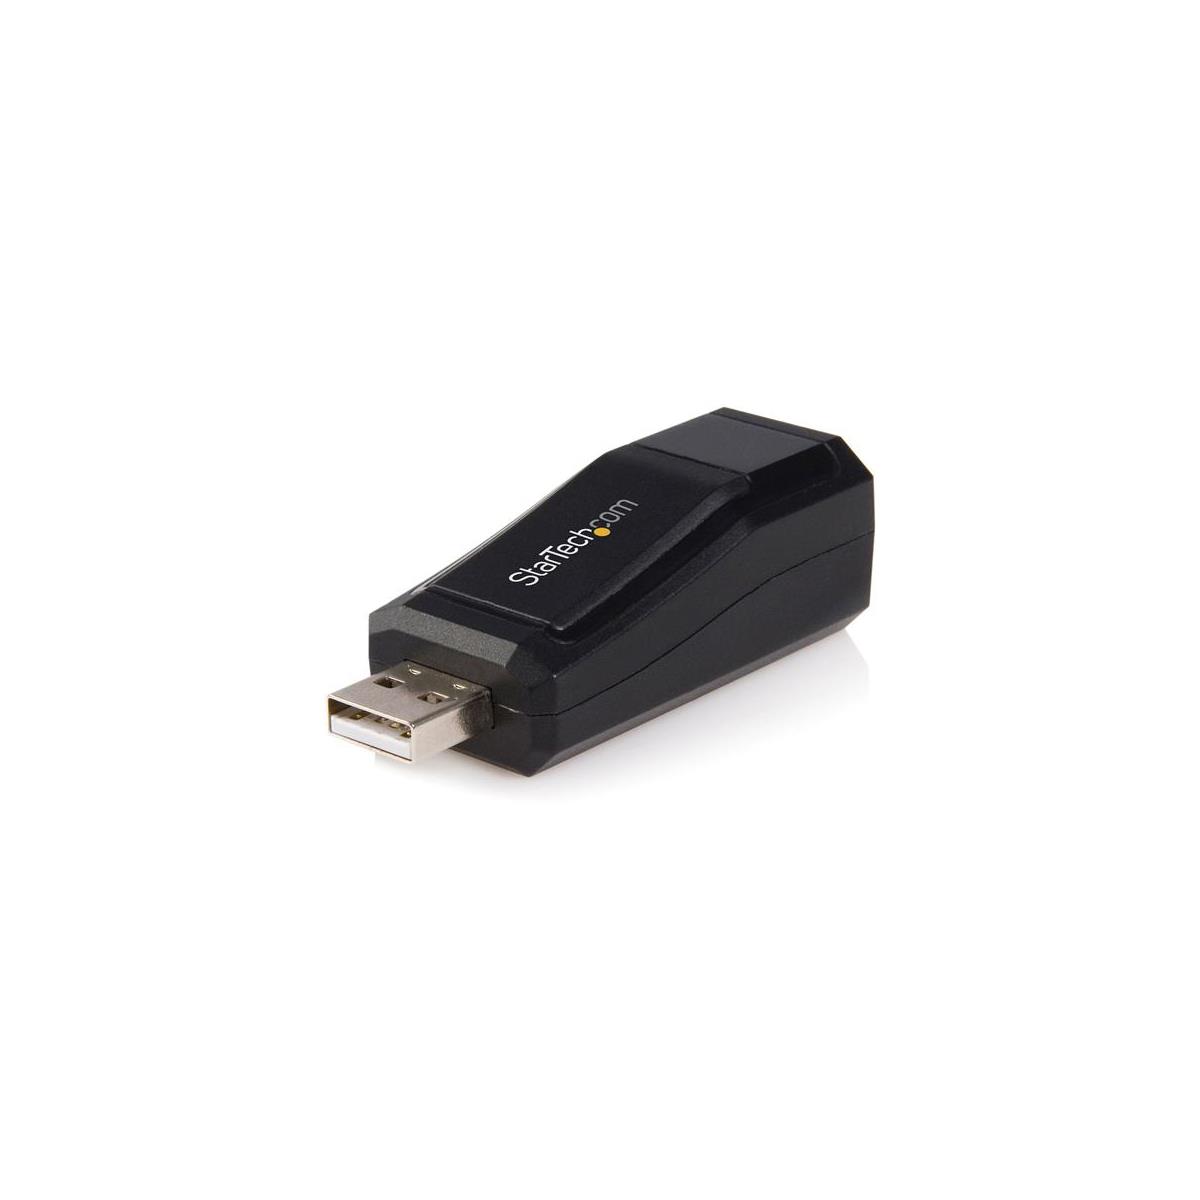 Image of StarTech USB 2.0 to 10/100 Mbps Ethernet Network Adapter